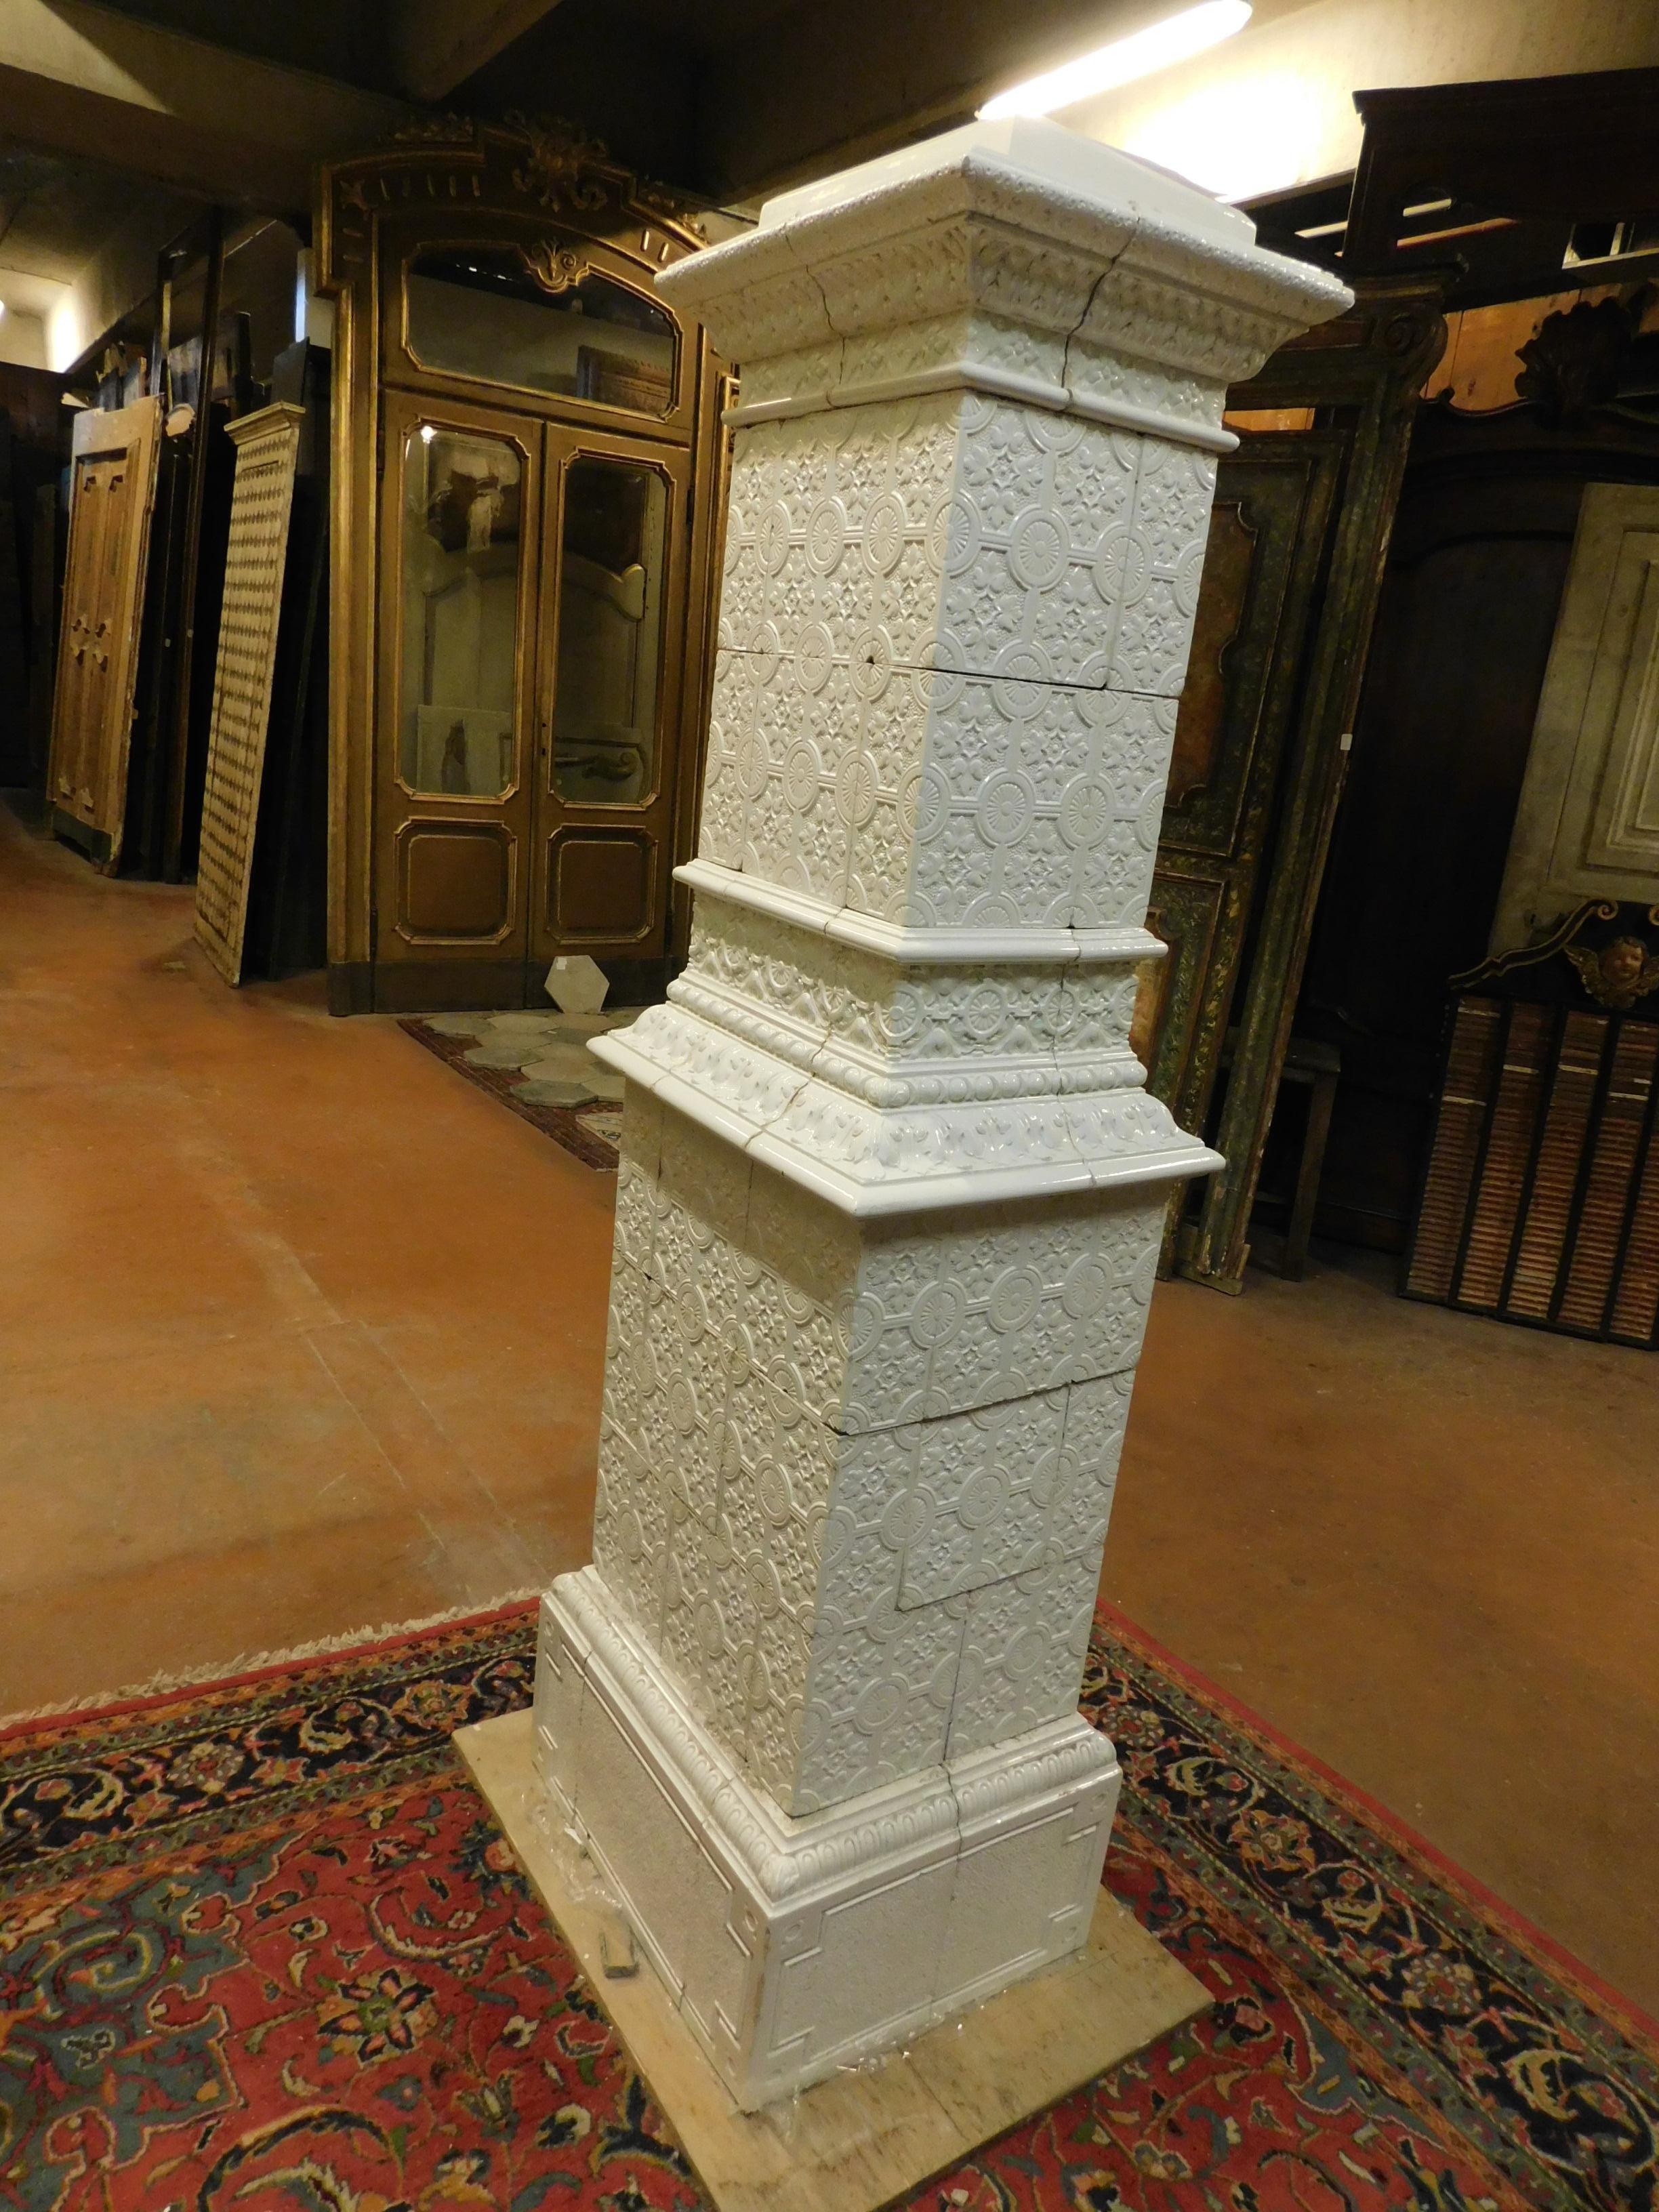 Ceramic Antique White Majolica Stove, Carved Tiles Texture, 19th Century, Italy